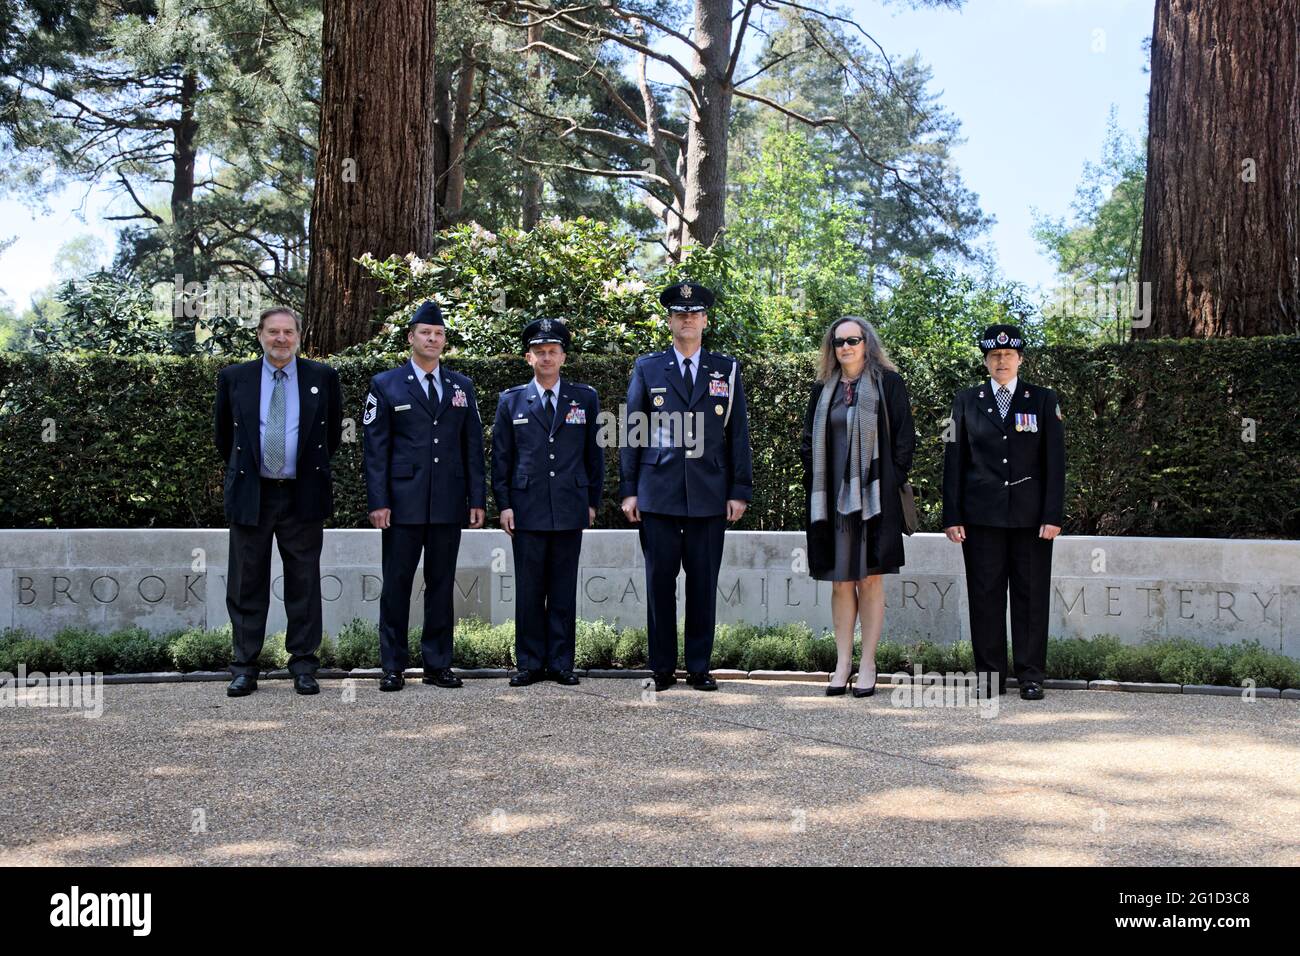 Memorial Day UK 2021 Brookwood American Military Cemetery left to right: Angelo Munsel, Superintendent of the American Cemetery; Chief Master Sergeant Michael J. Venning; Colonel Jon T. Hannah Commander 422nd Air Base Group; Brigadier General Jefferson J. O'Donnell, Defence Attache; Mrs Caryn R. McClelland, A/Deputy Chargé d'Affaires of the U.S. Mission to the United Kingdom & an Officer of the Ceremonial Association of Surrey Police (CASPER) Stock Photo